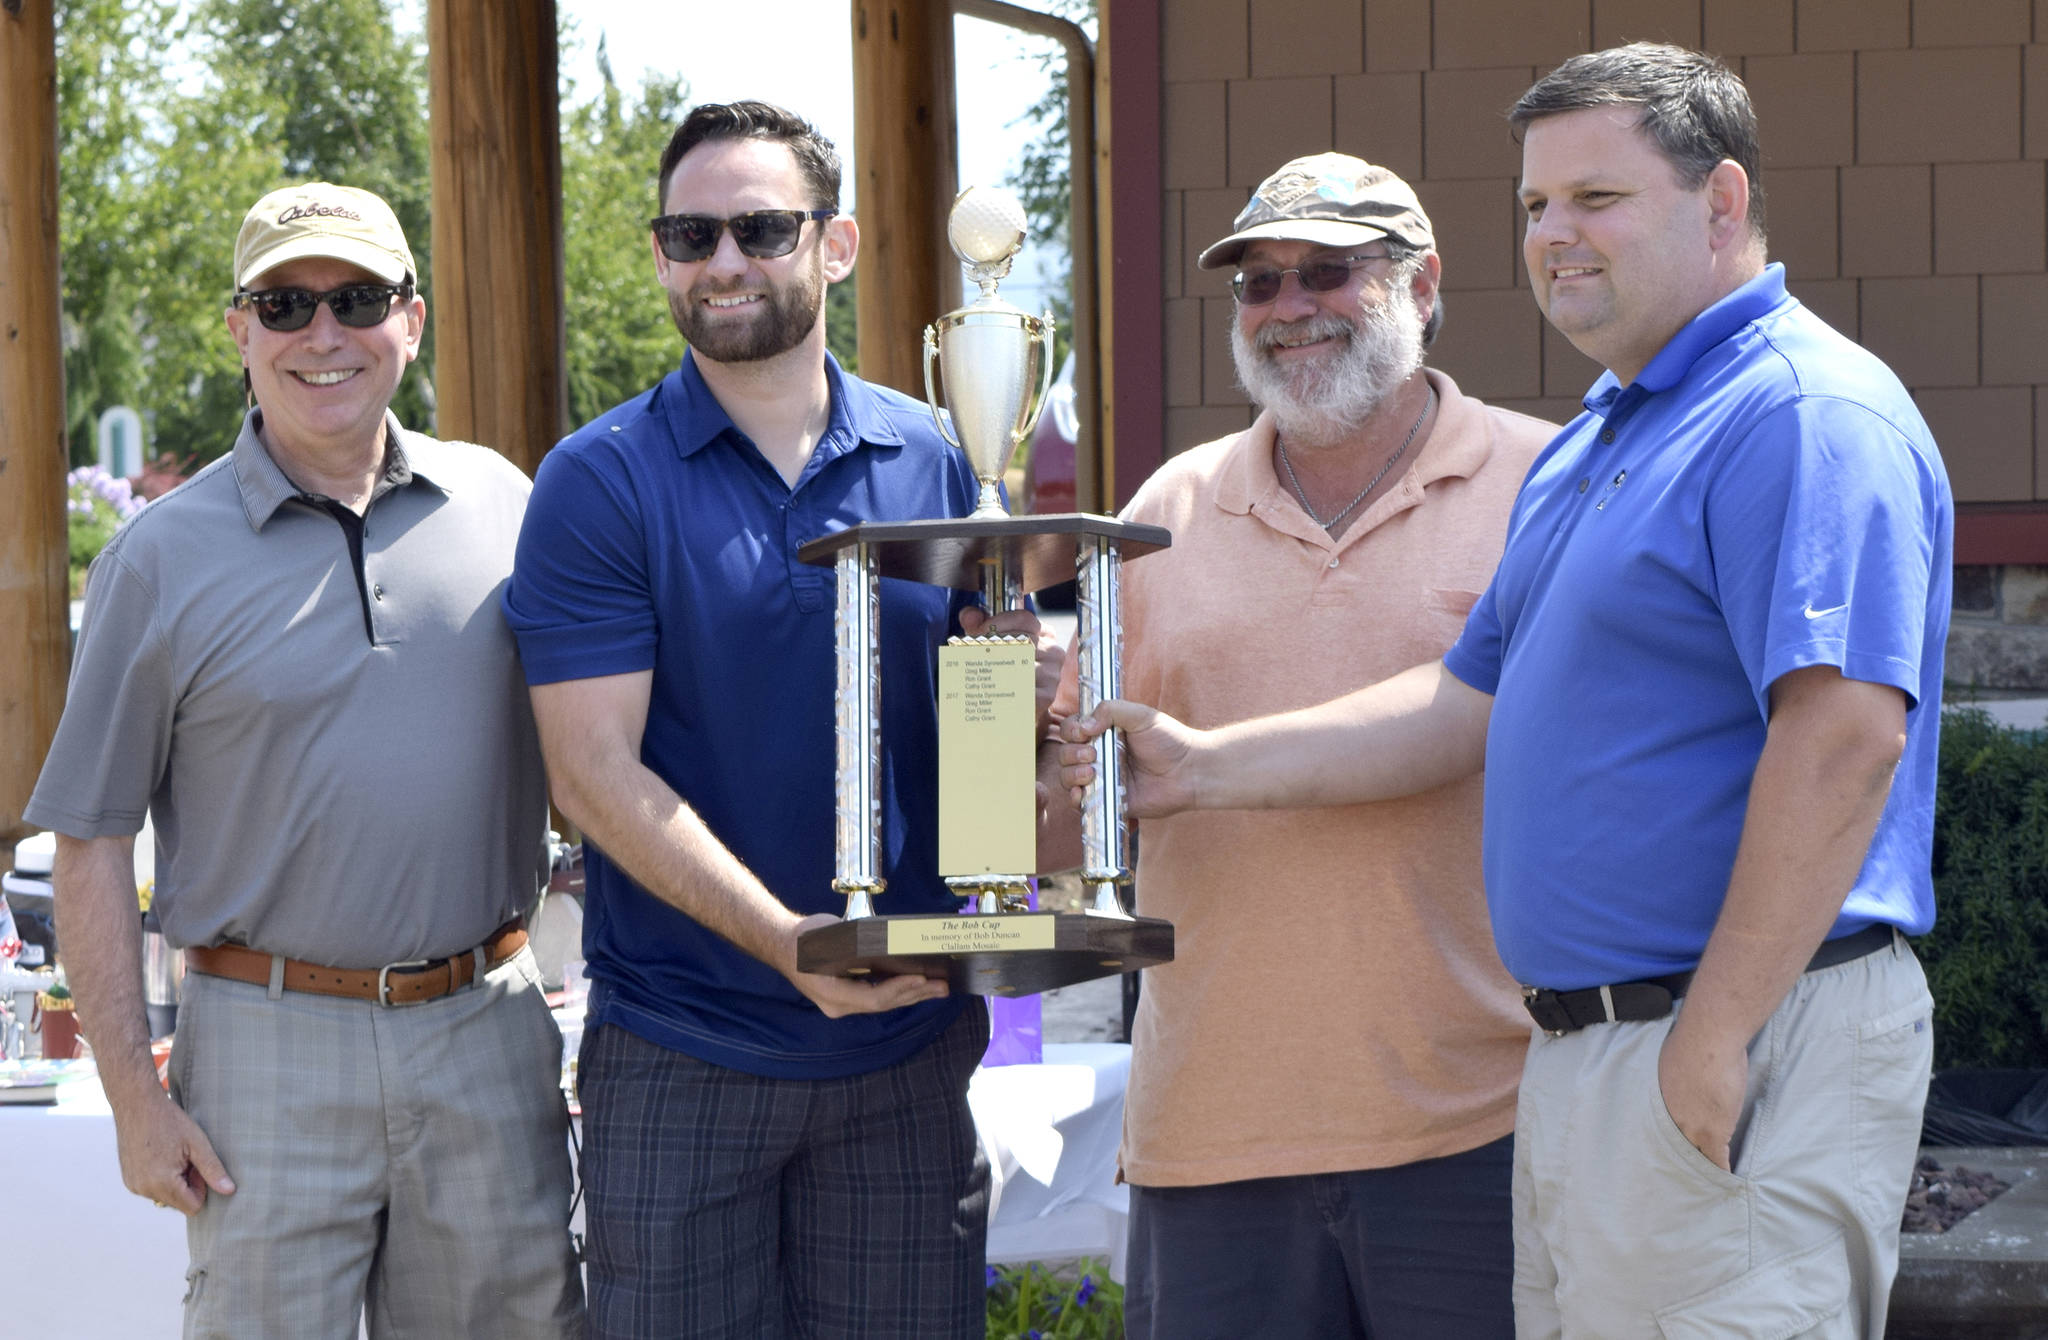 Catherine McKinney/Clallam Mosaic                                The winners of the 2018 Bob Cup are from left, Don Sizemore, Matthew Bumala, Brian Cays and Kalo Vass. The tournament raised more than $20,000 for Clallam Mosaic, a nonprofit that works with individuals with special needs.